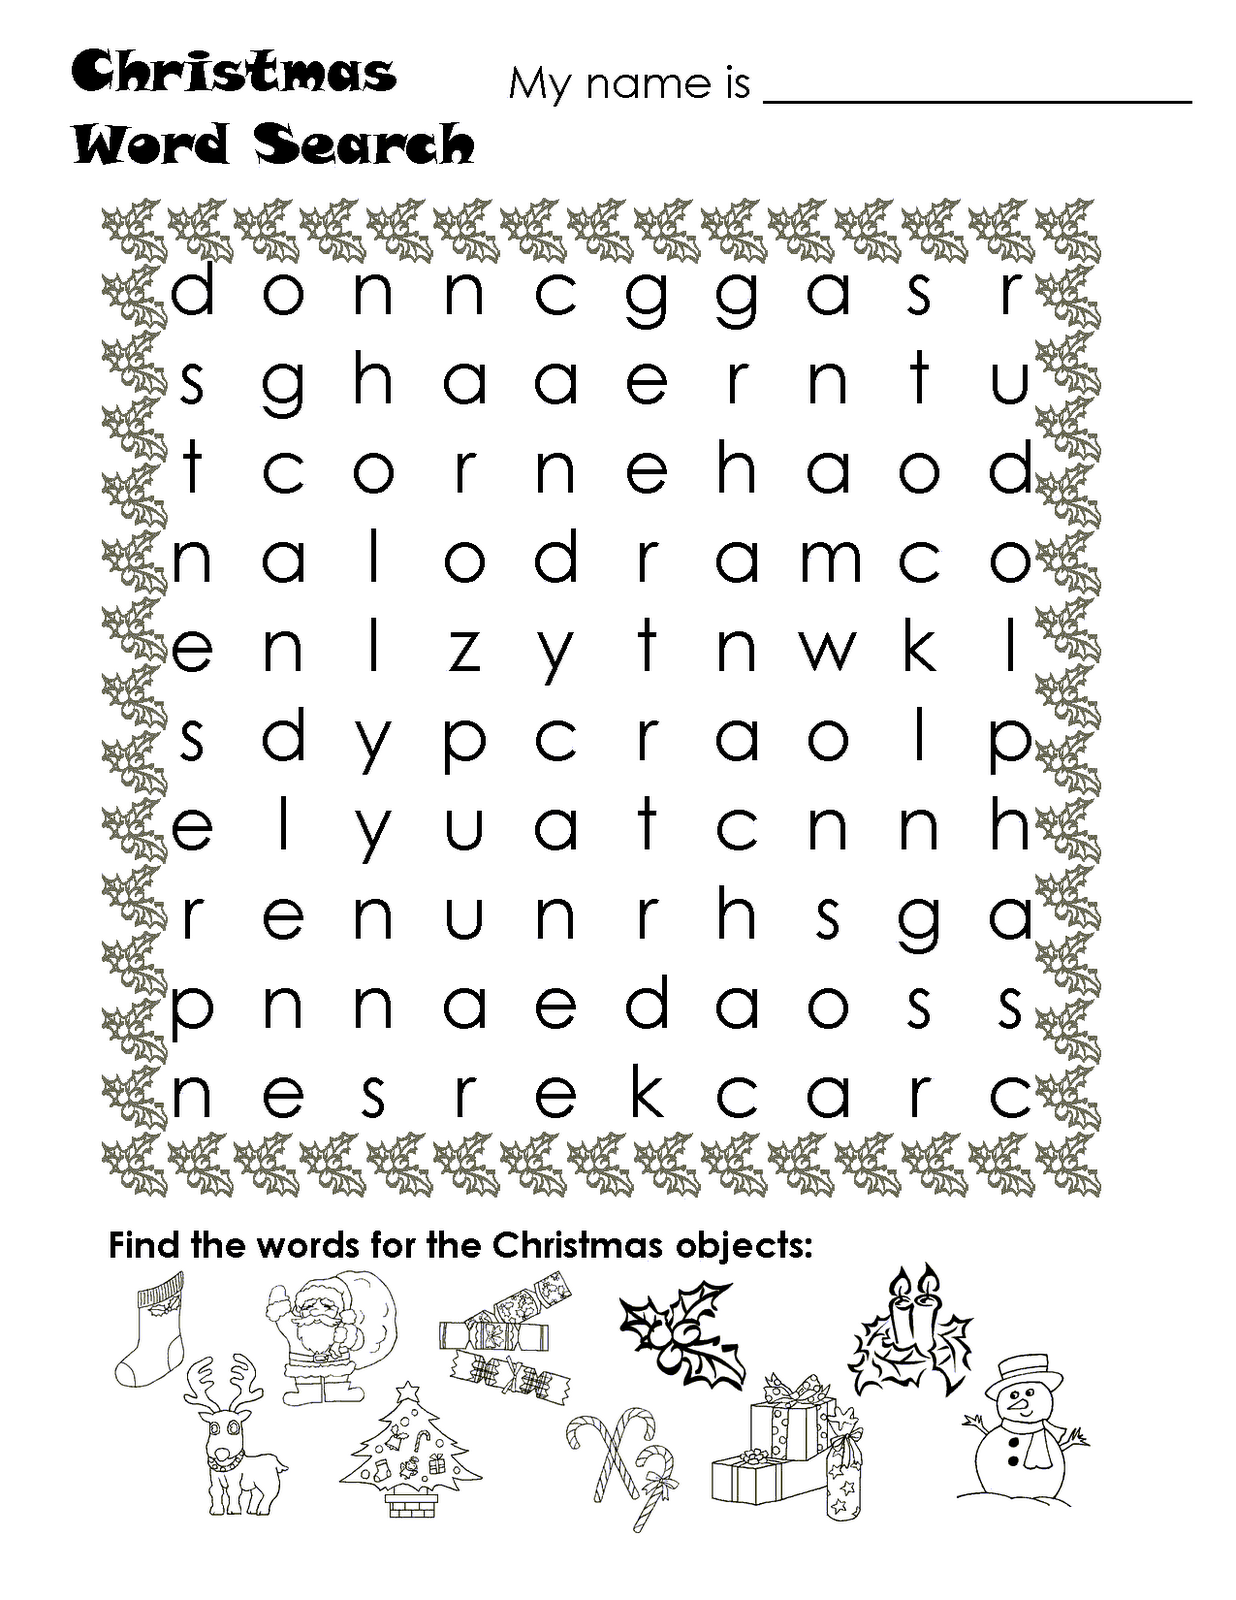 Christmas wordsearch